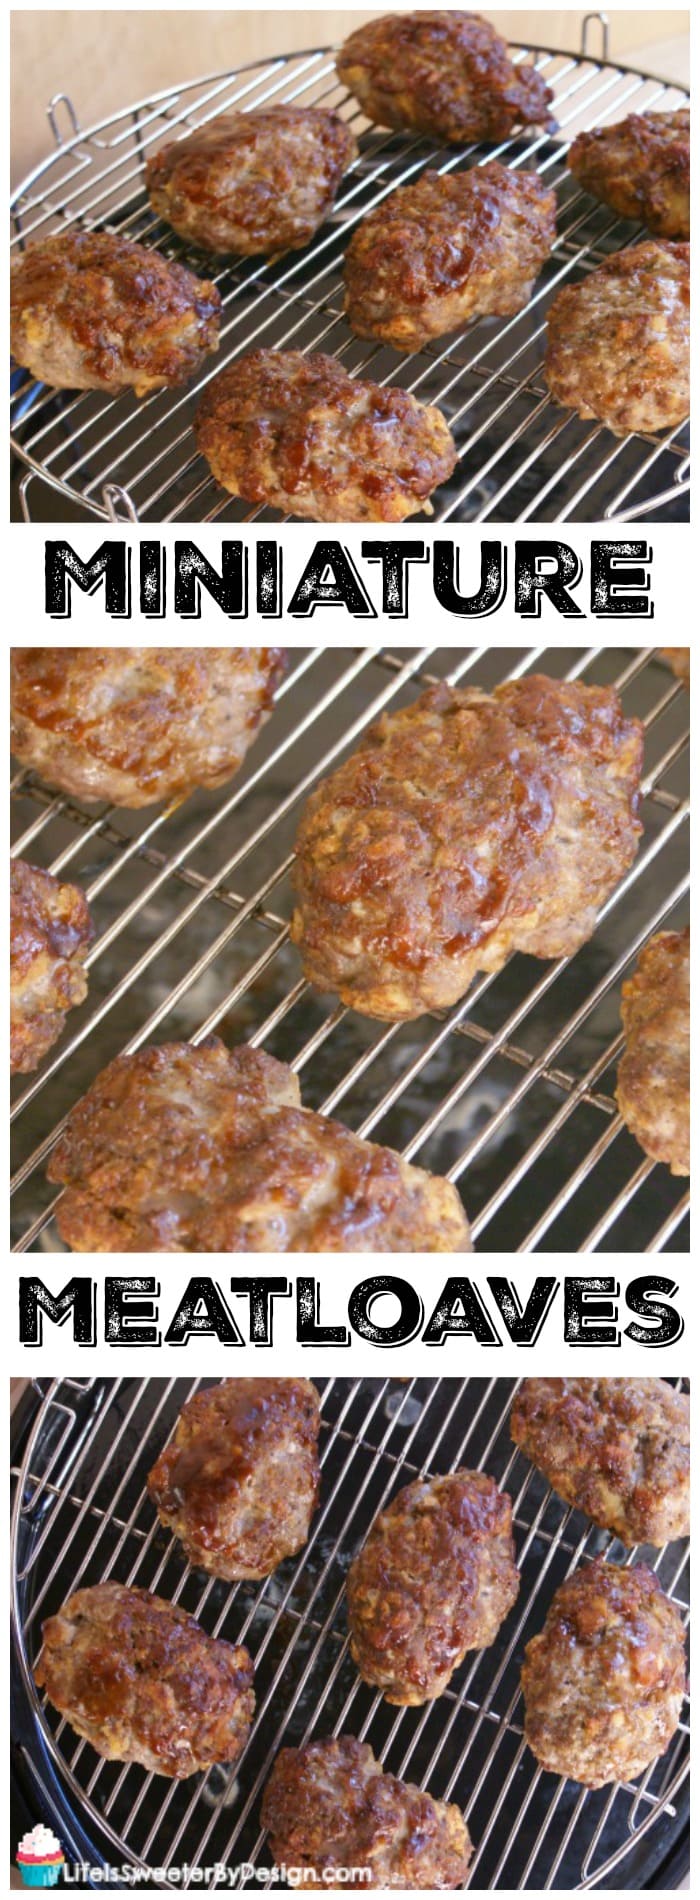 Mini Meatloaf are a great main dish and quick to make and cook! Make your miniature meatloaf in the Nuwave Oven for an even quicker cooking time and you won't heat your kitchen up! A dinner recipe that is even kid friendly!